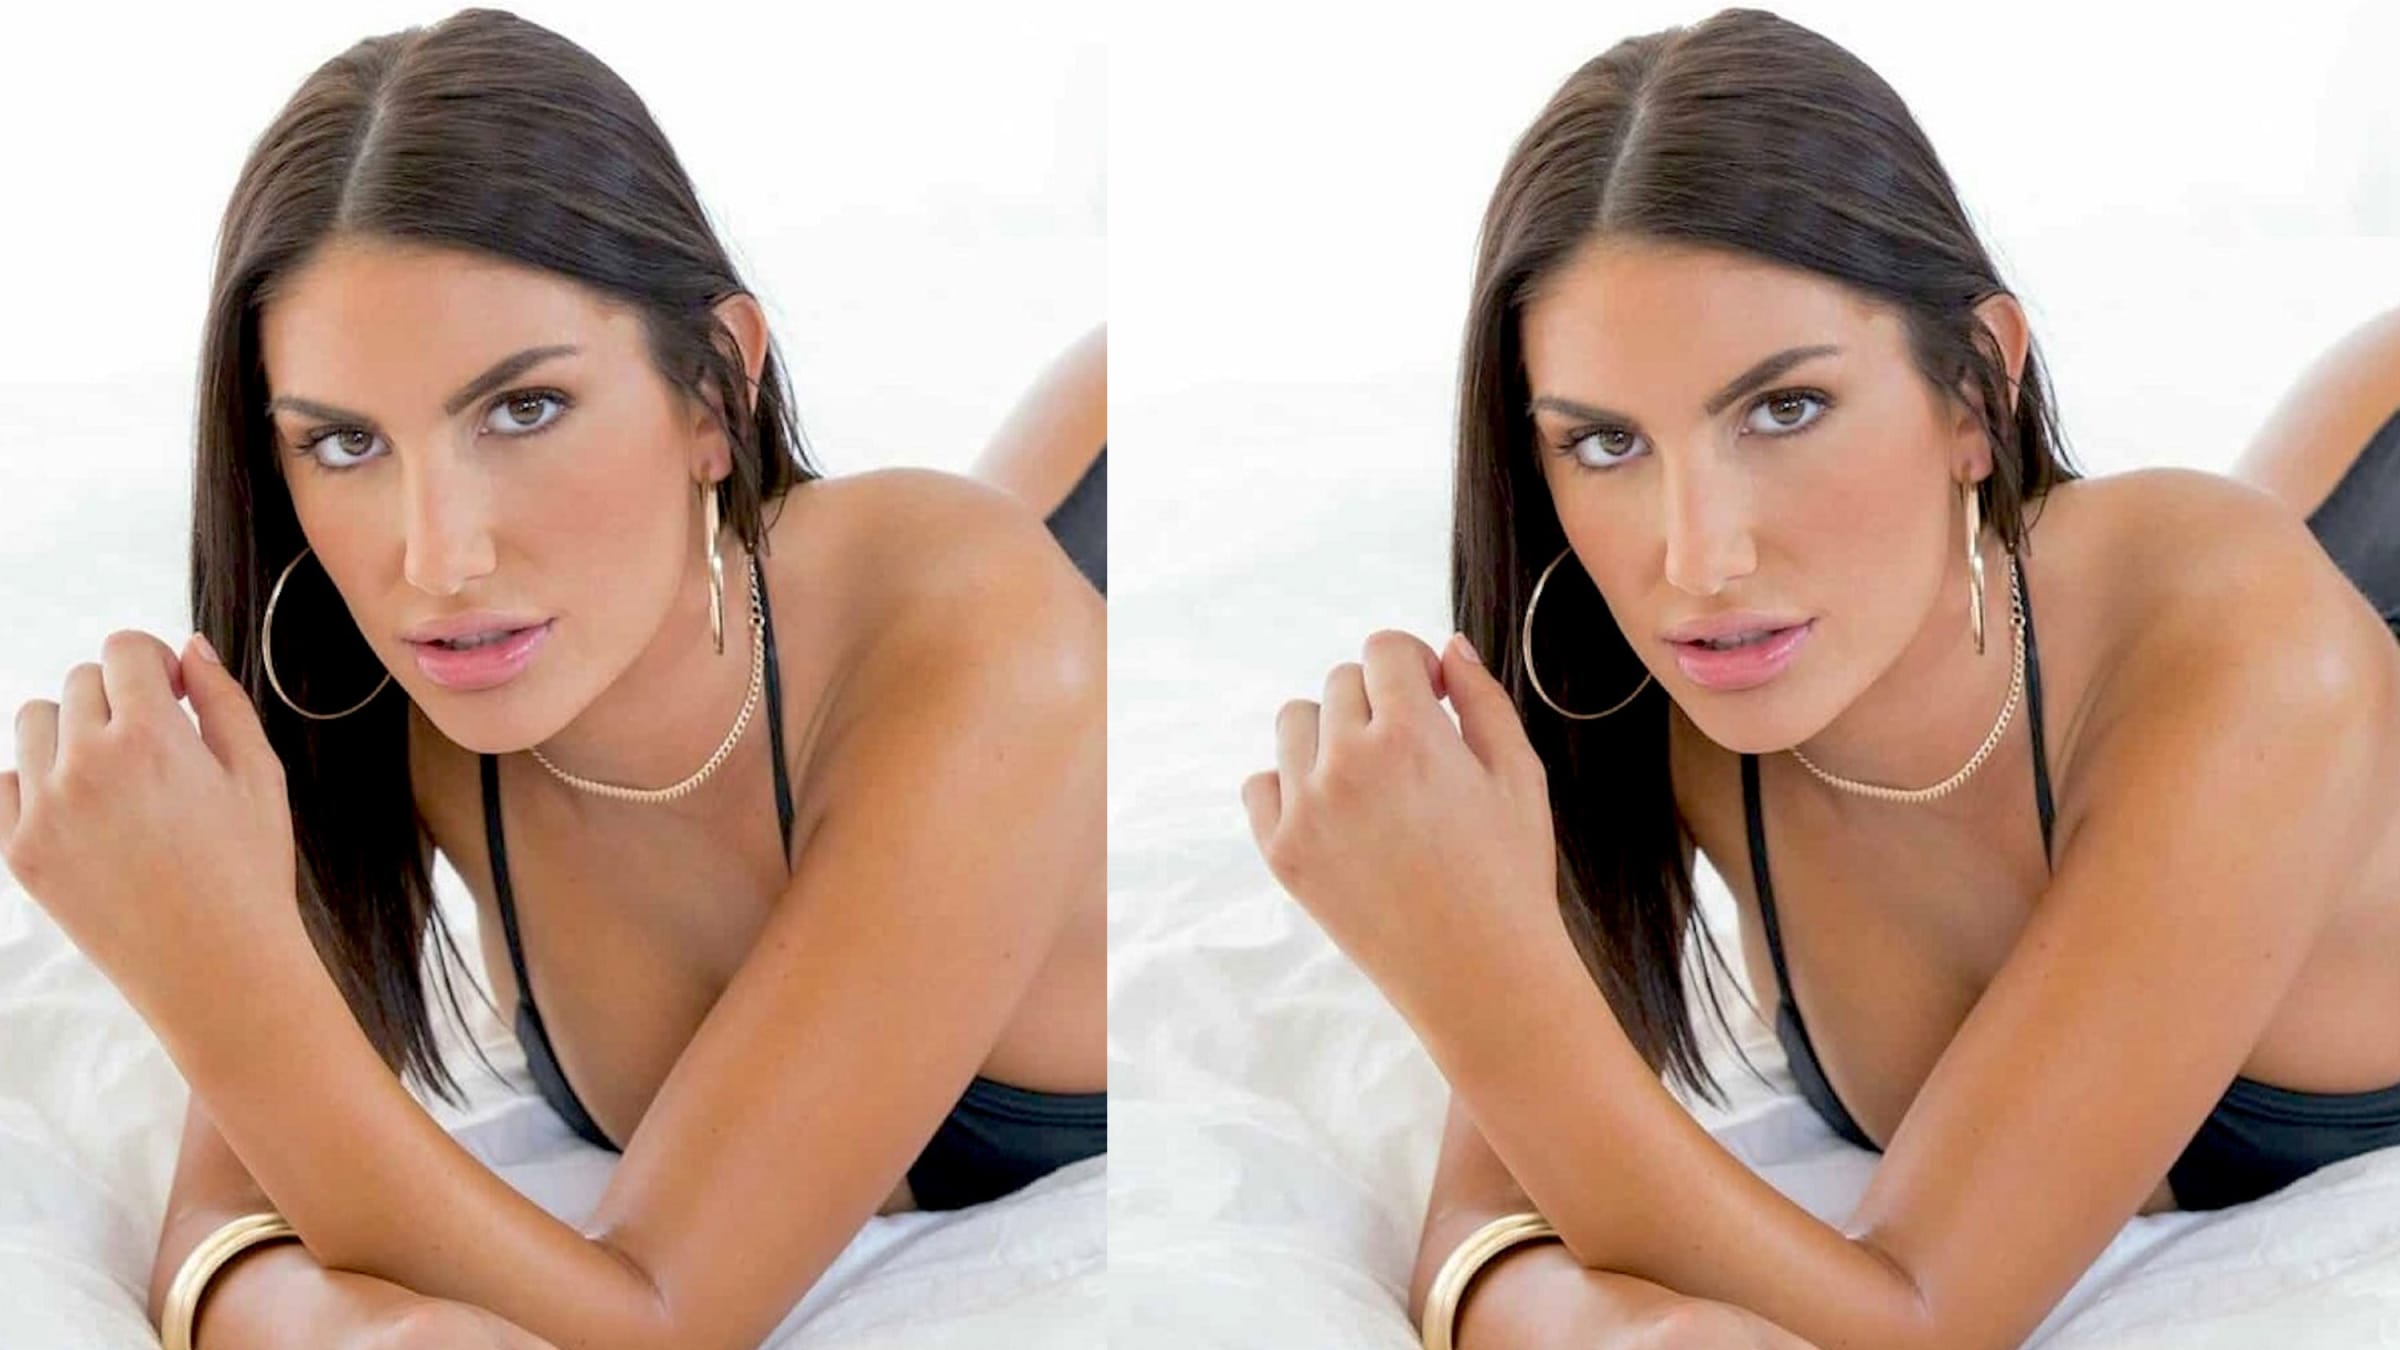 Very Hard Fuck Of Beautiful Girl In A Rape - Mother of 'Cyberbullied' Porn Star August Ames Opens Up About Her Last Days